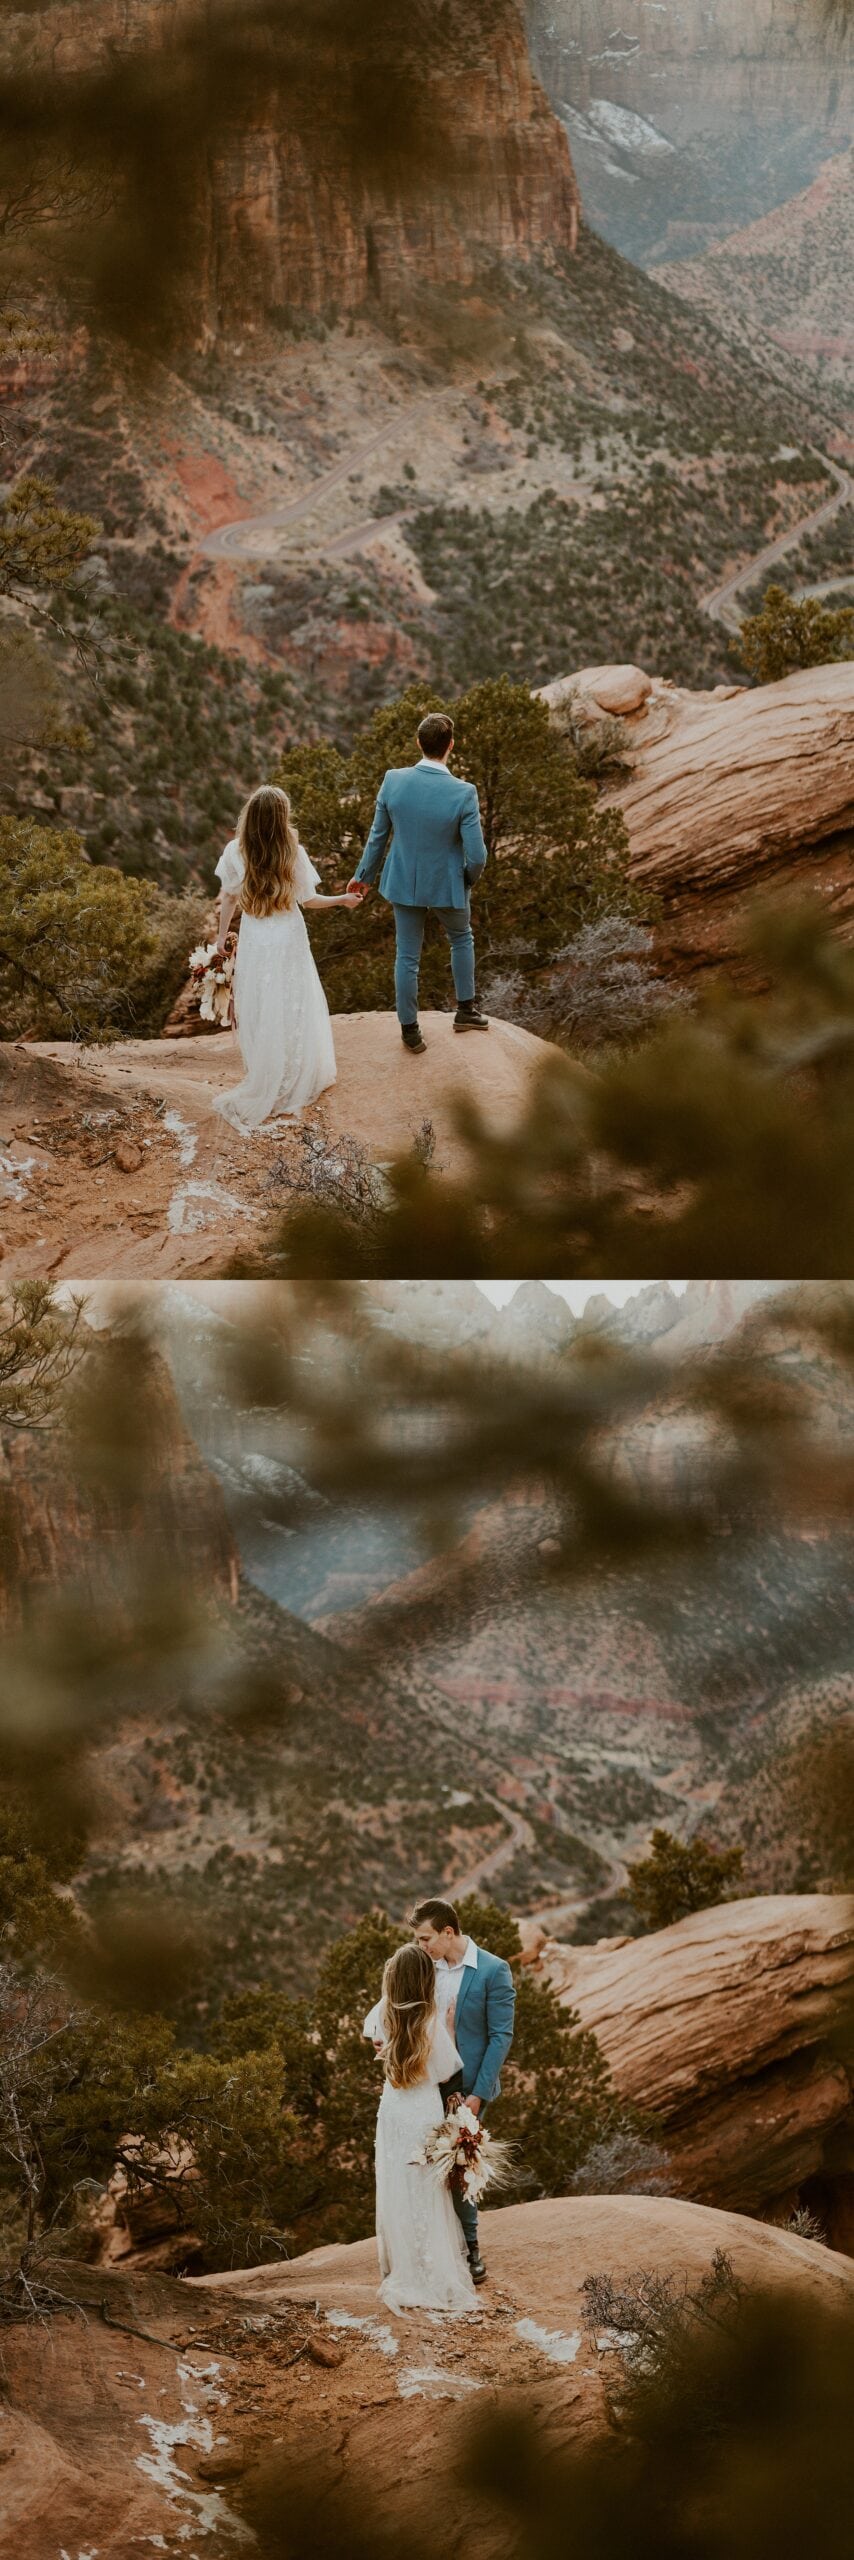 bride and groom holding each other zion national park 

